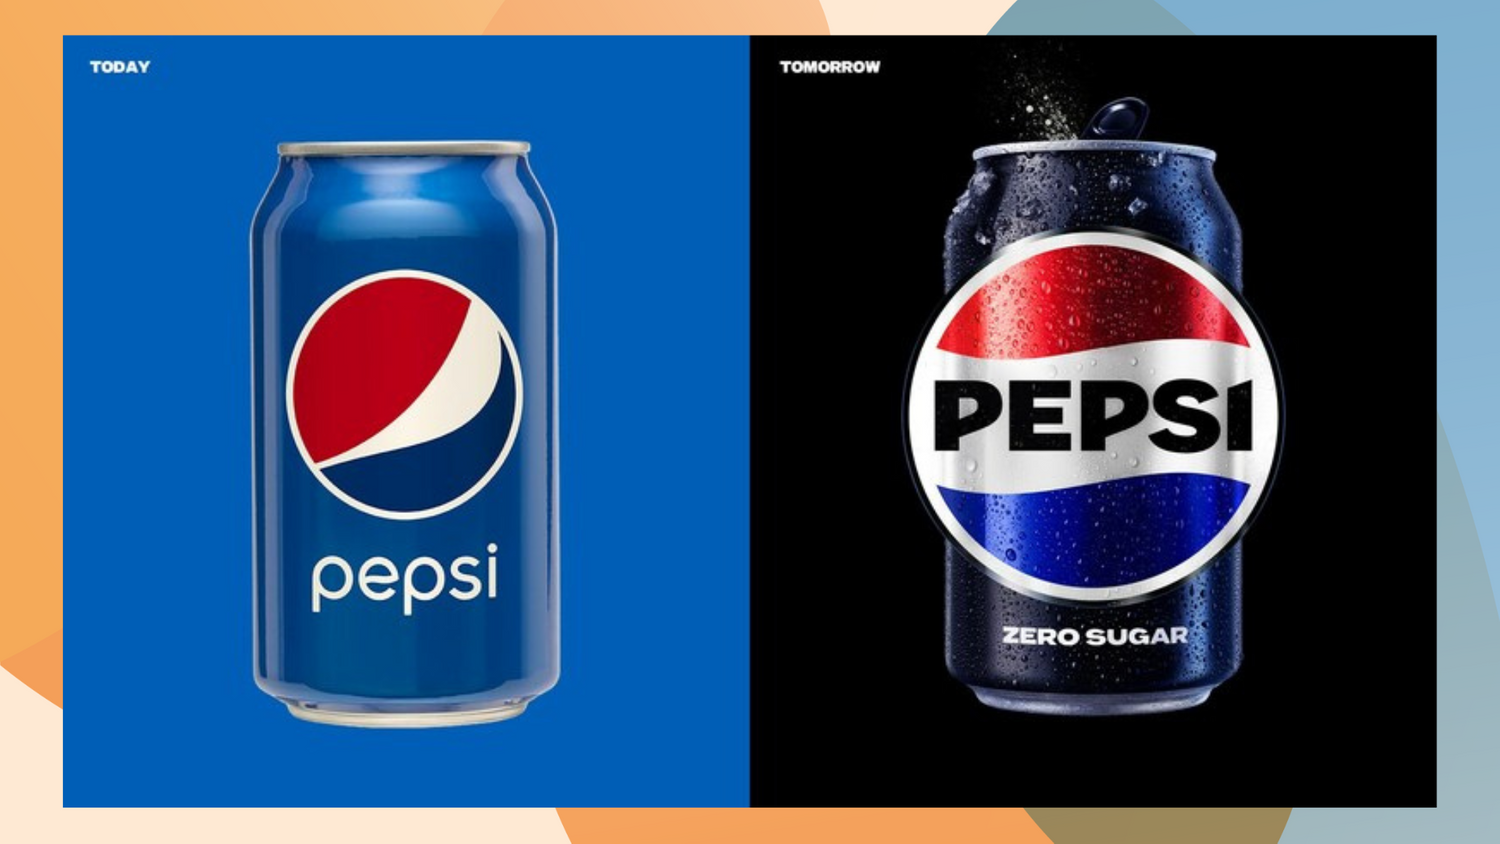 Case study: Pepsi’s new logo and 3 lessons on (re)branding